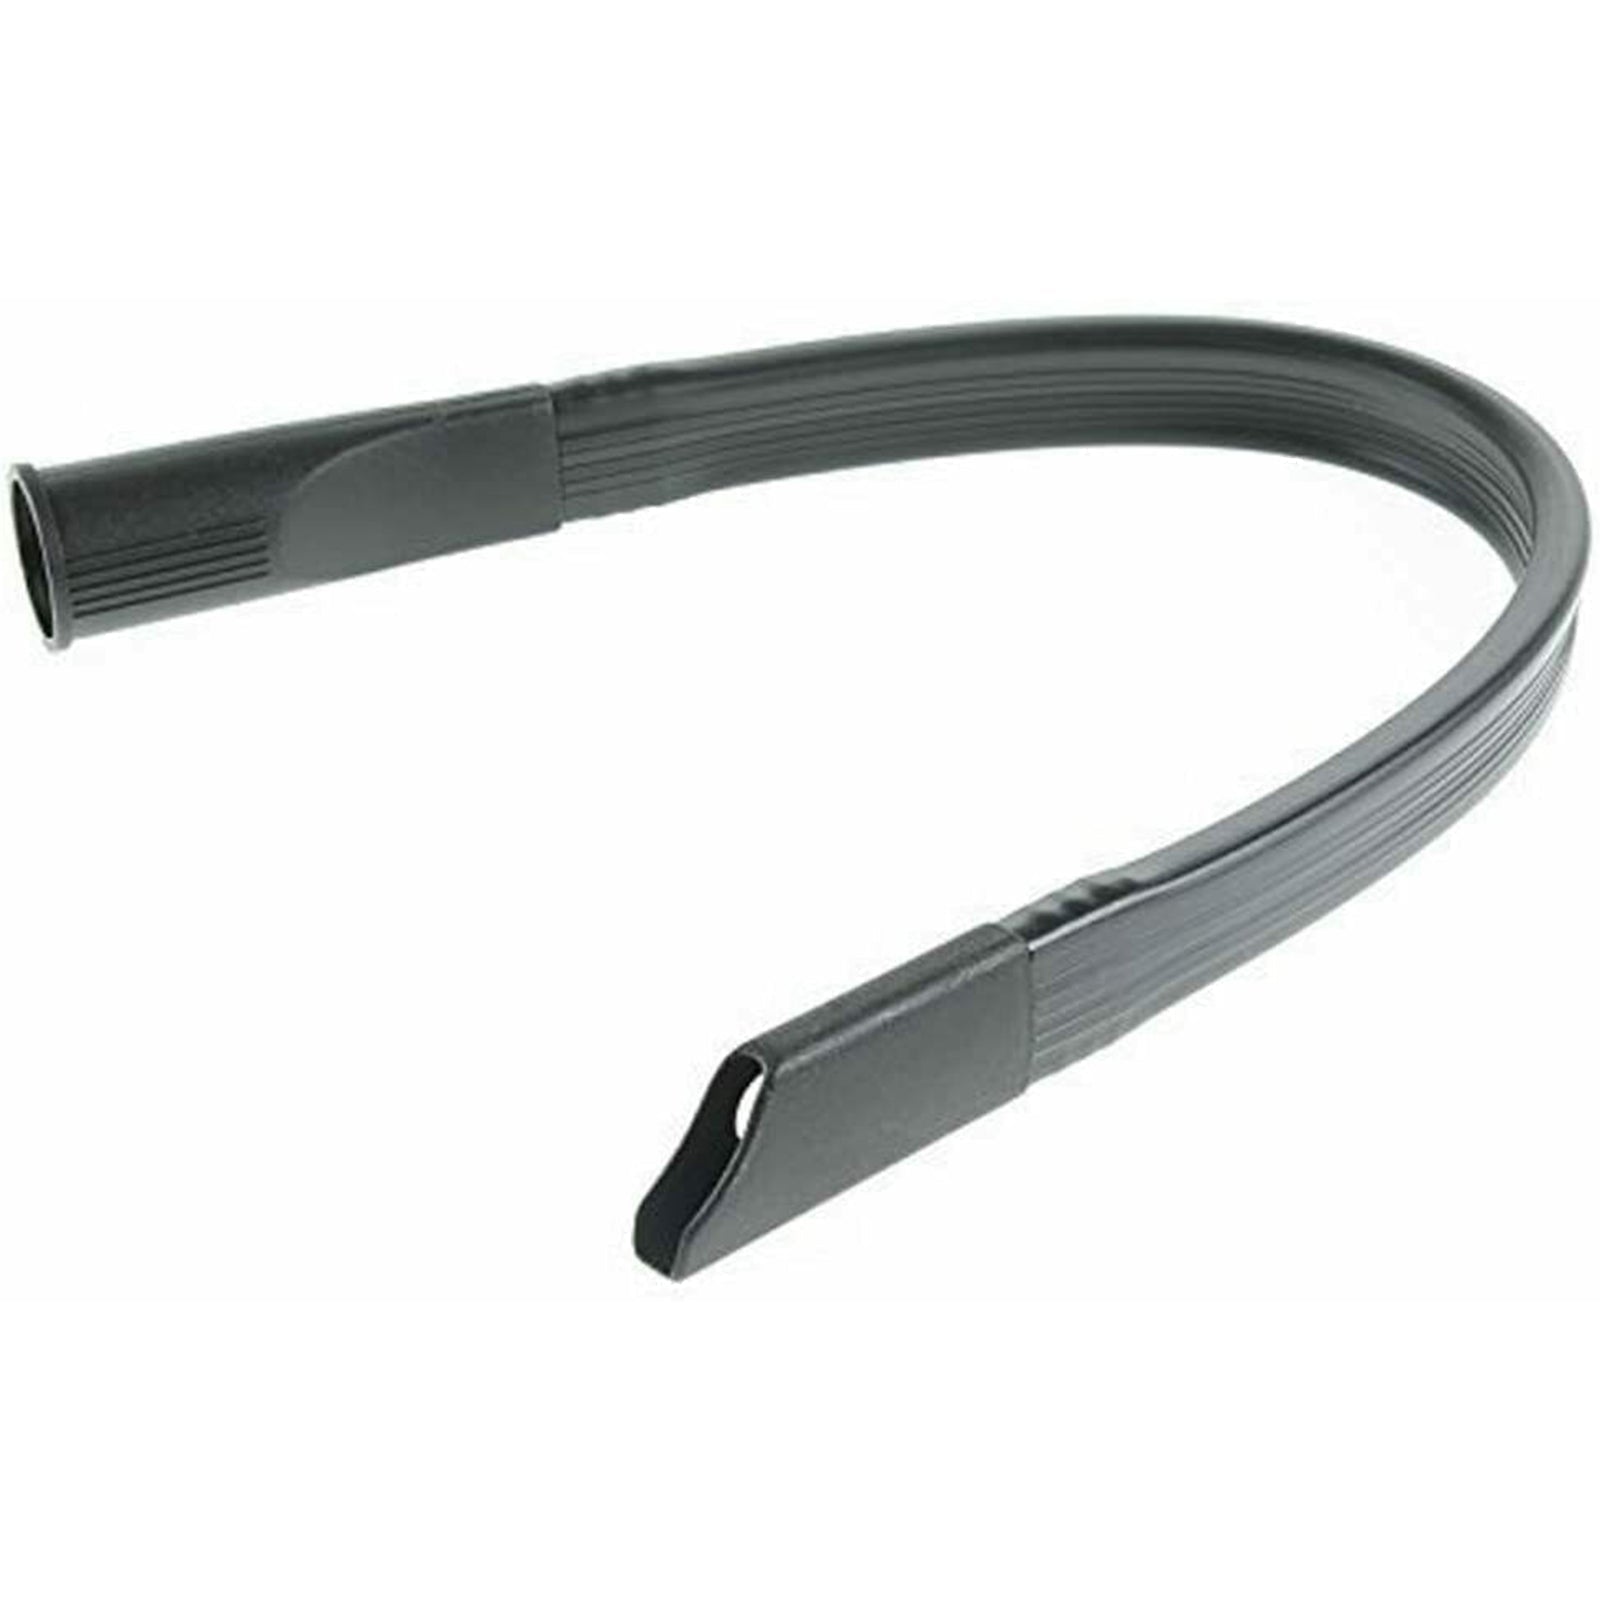 Flexible Crevice Tool Extra Long compatible with BISSELL Vacuum Cleaner (32mm or 35mm)